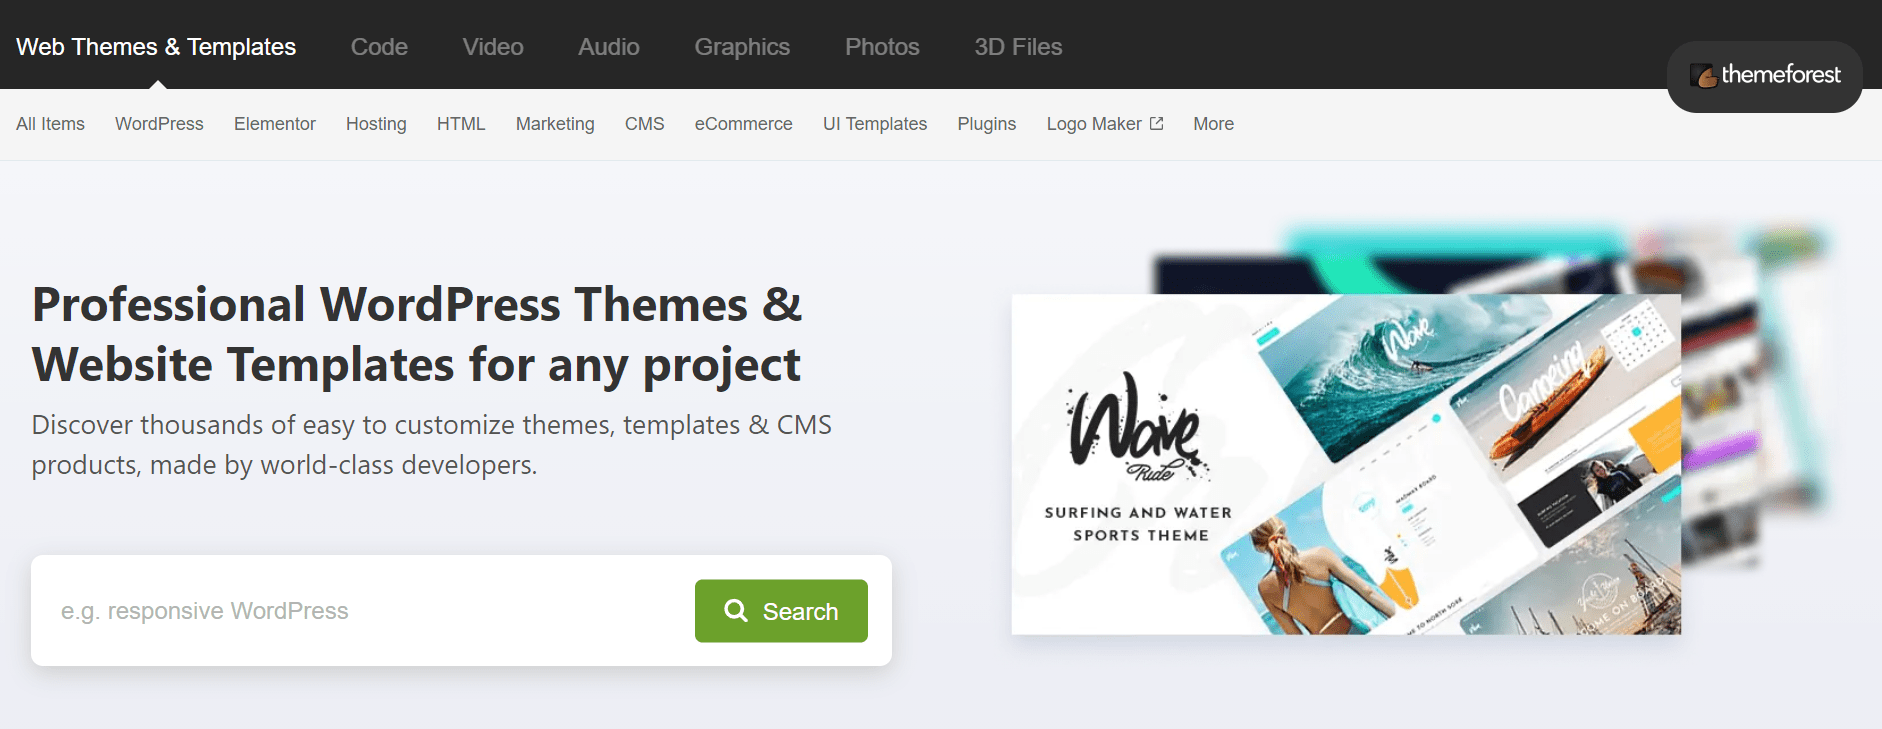 themeforest review